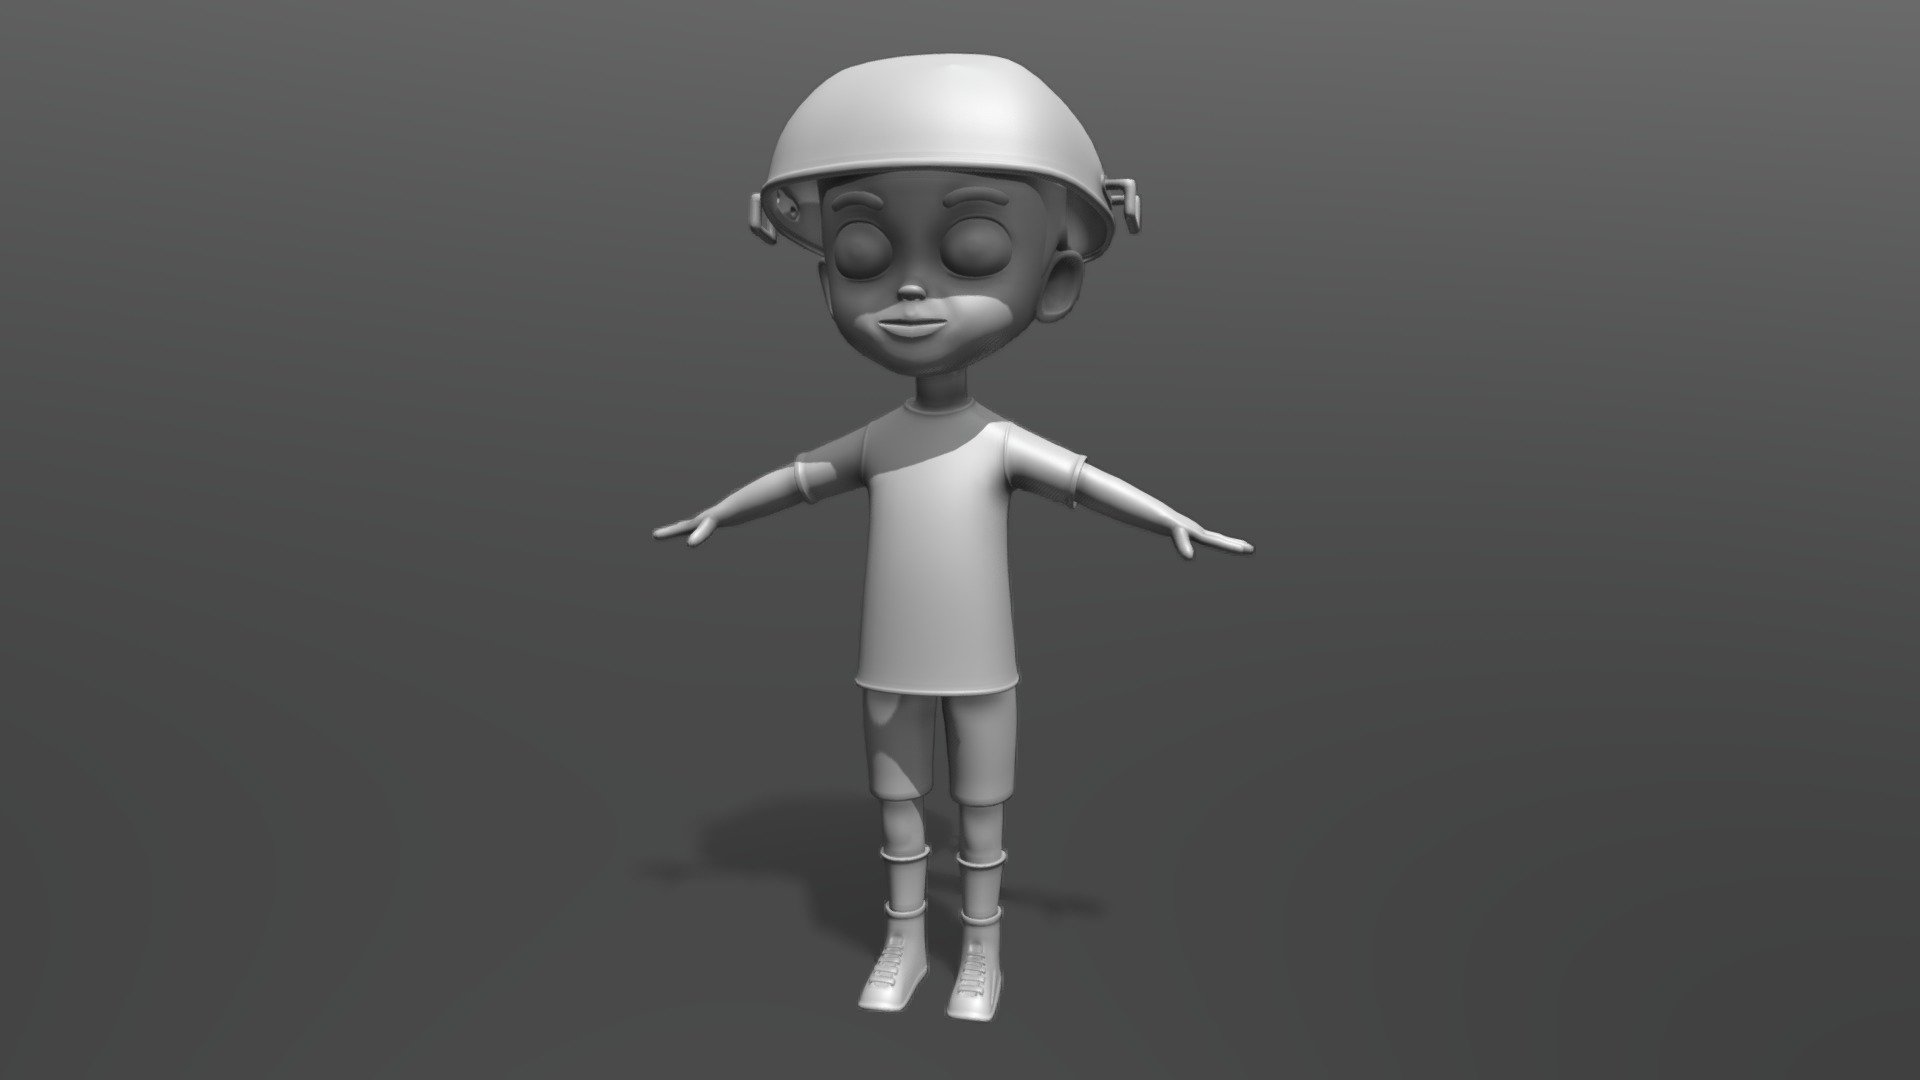 This character is the first experiment I made in the Blender software, although there have been changes that I made to this character. I am very proud of my character for this.

by the way its name is Snouu 3d model